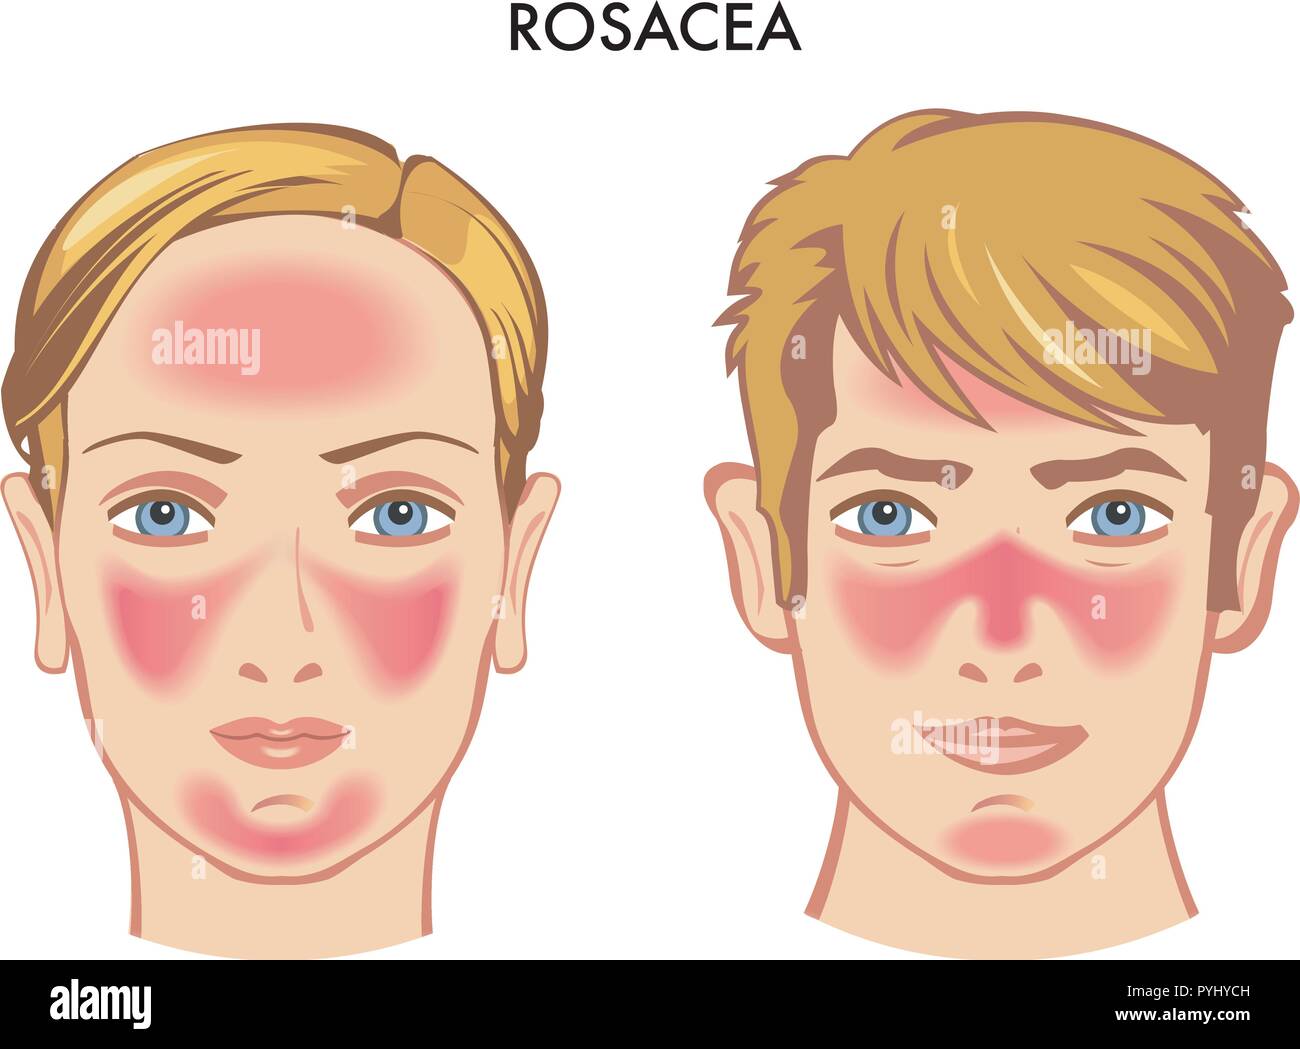 vector medical illustration of the symptoms of rosacea Stock Vector